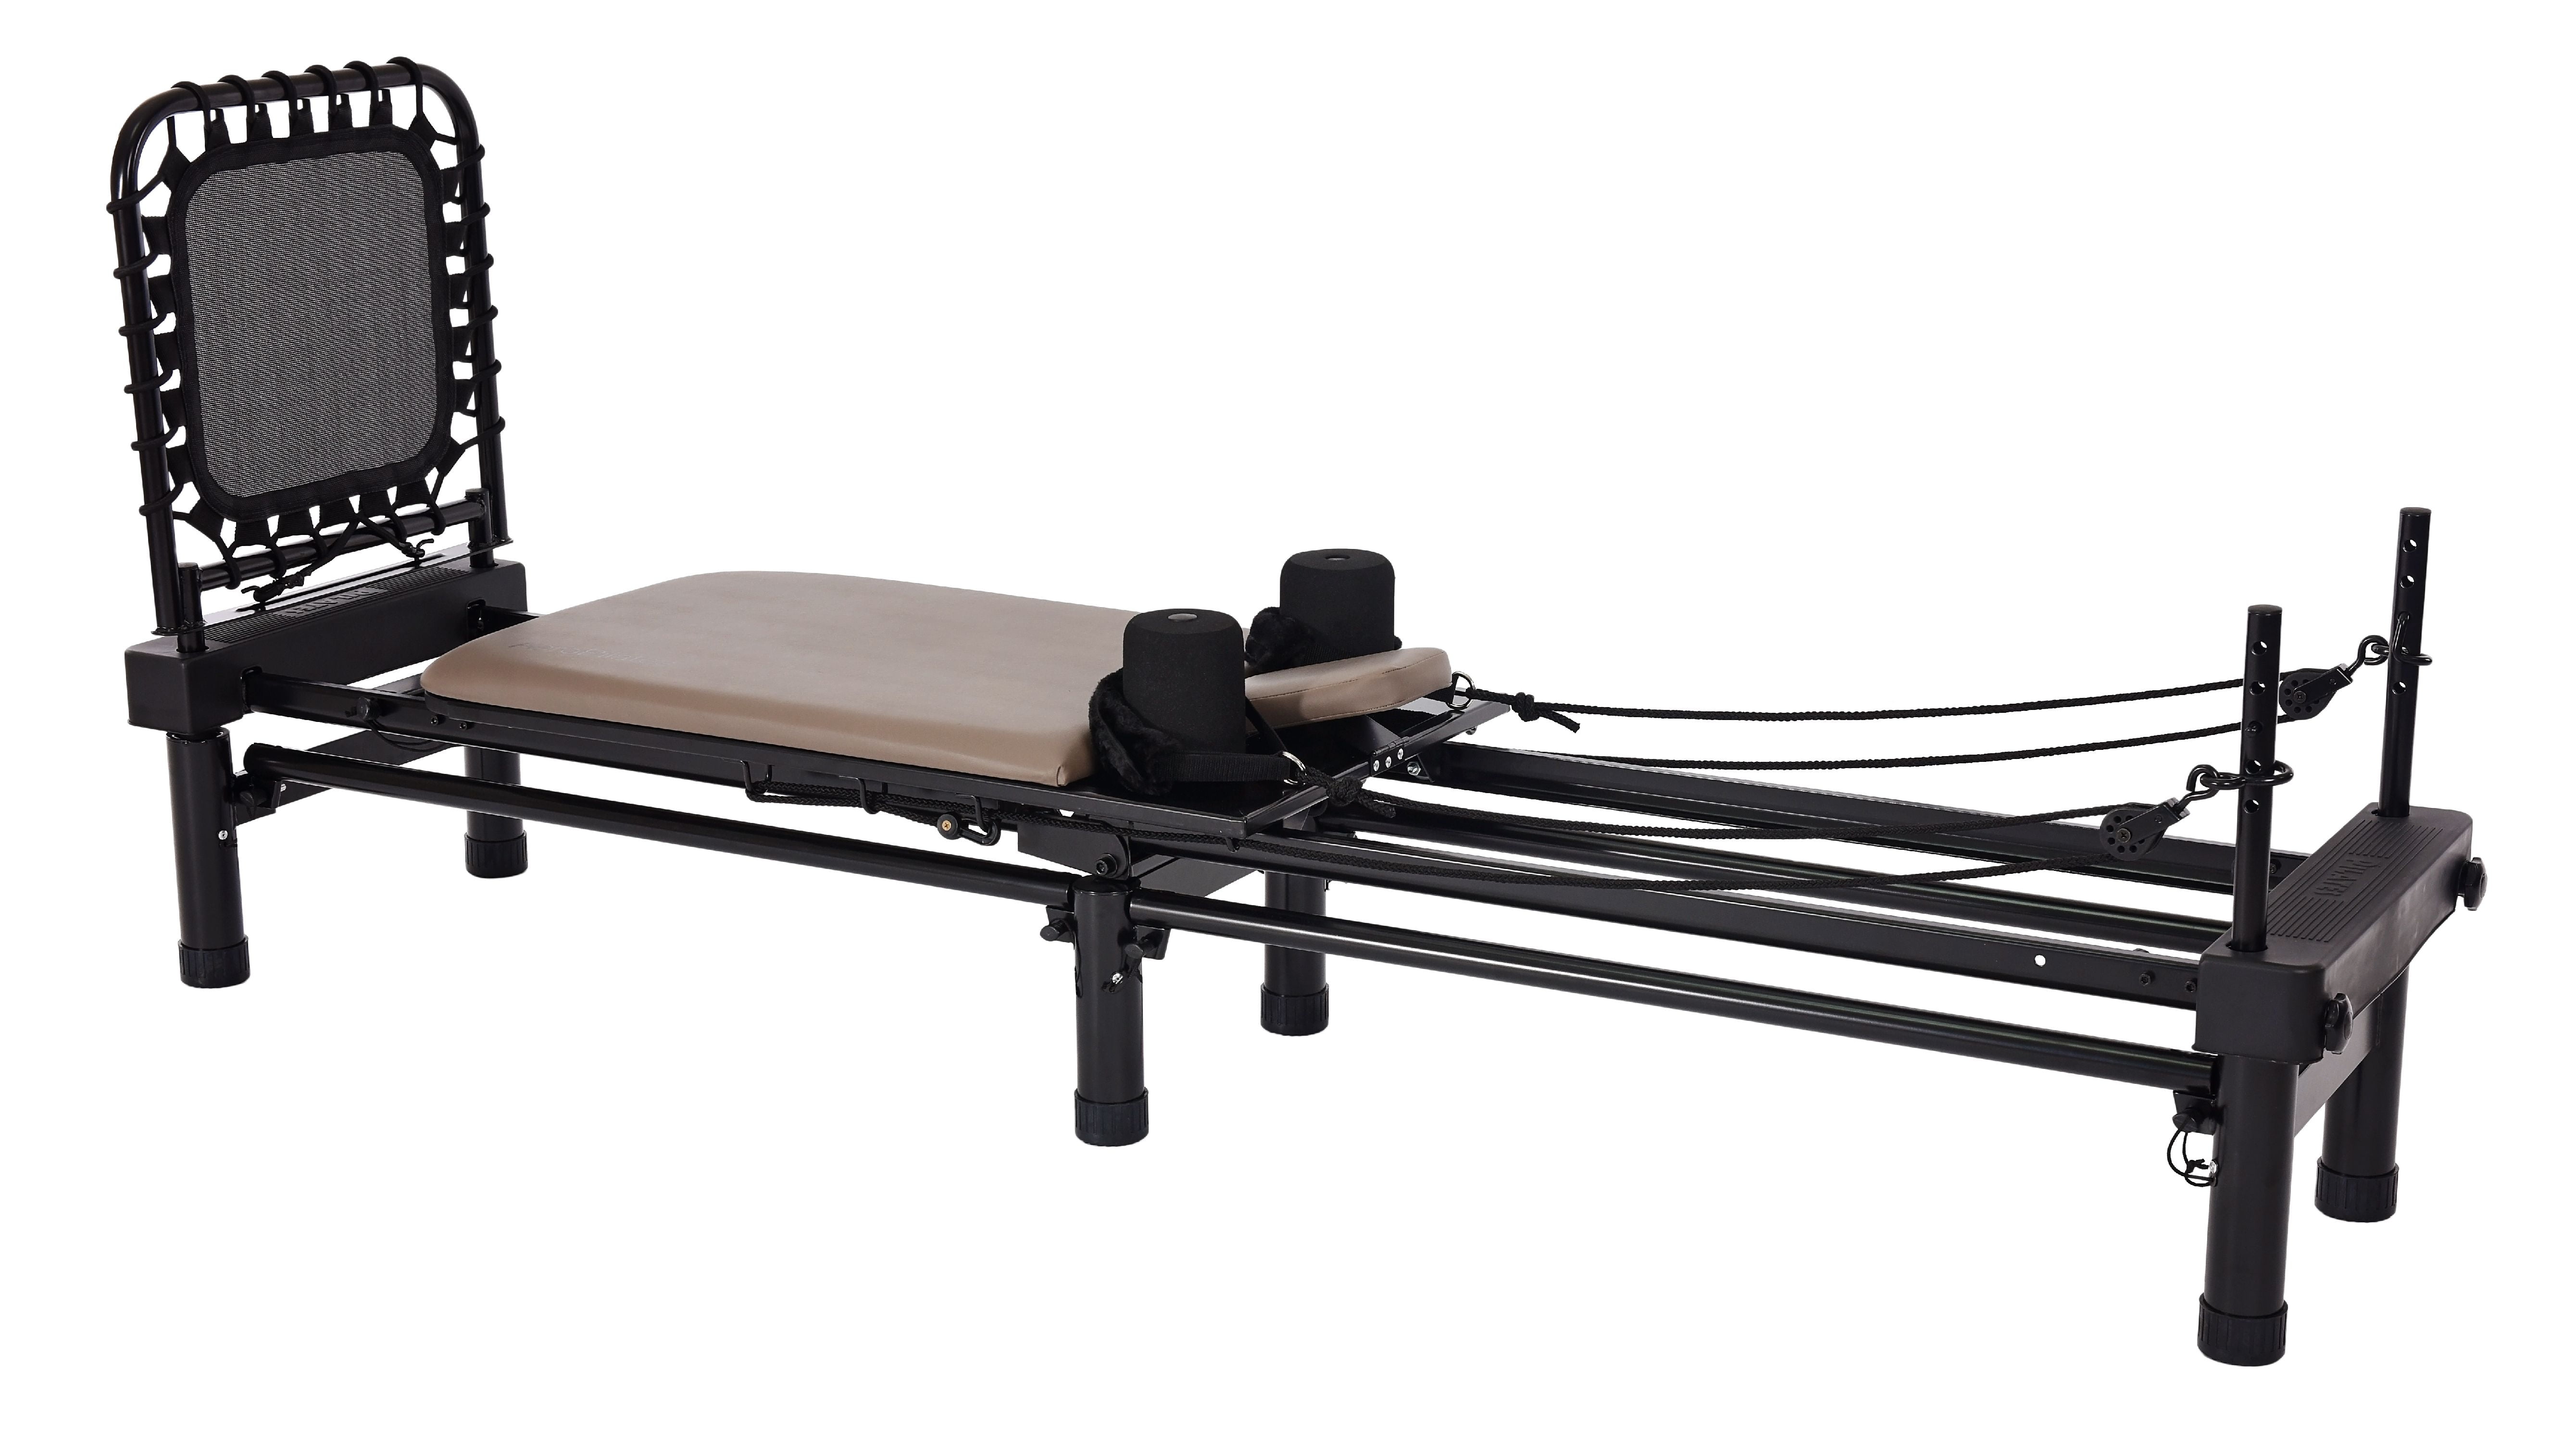 Stamina Products AeroPilates Reformer 651 Body Resistance Workout System